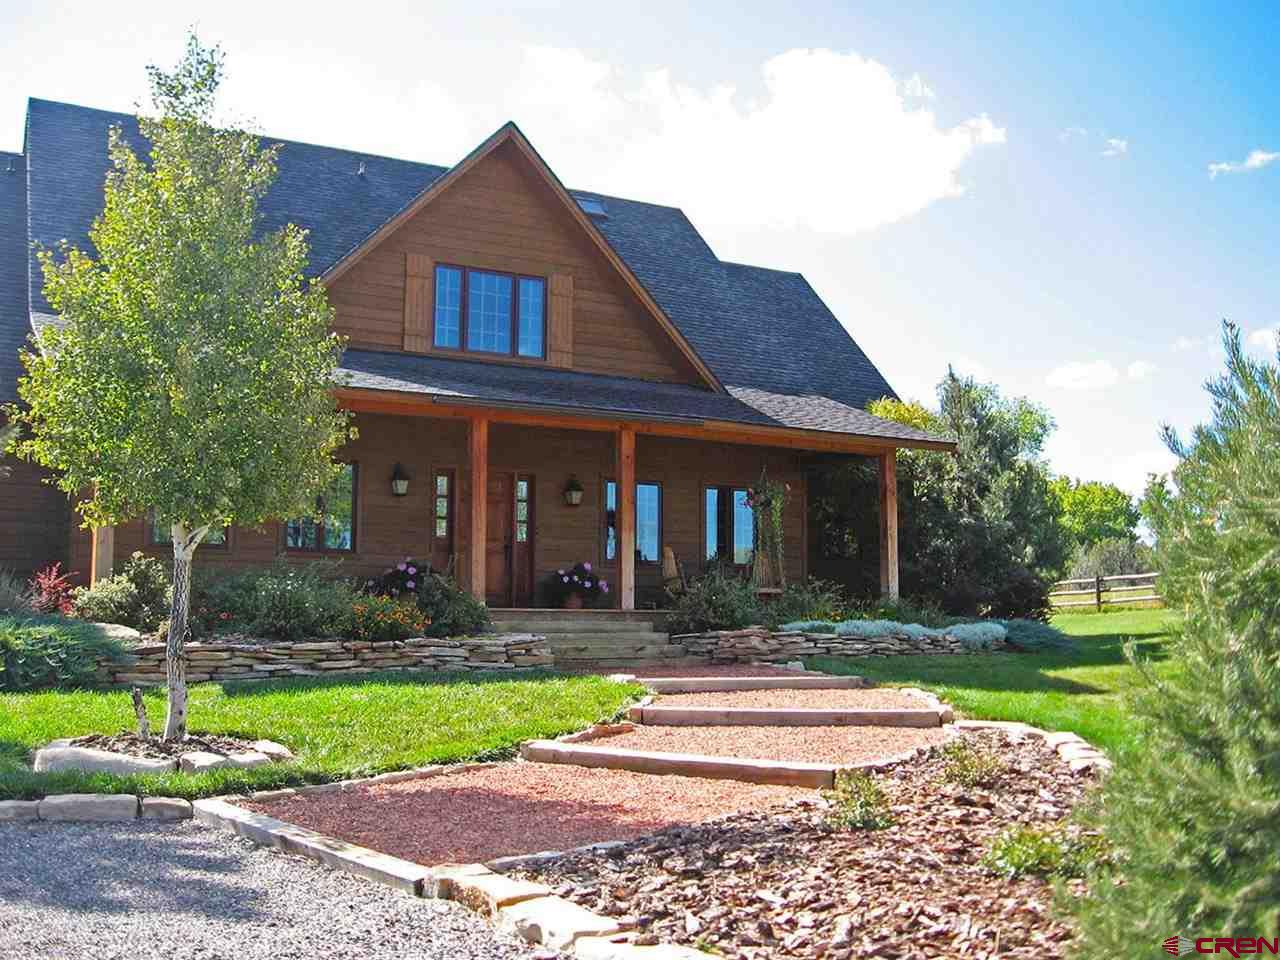 This luxurious 225 acre estate is conveniently located 5.5 miles west of Montrose, Colorado off of Spring Creek Road. This ranch is positioned atop a beautiful mesa overlooking the Montrose Valley to the East and a short distance to the west is the beautiful Shavano Valley. Above the rolling hills and the lush green meadows are spectacular views of the San Juan Mountain to the south. Running along two sides of the property are canals lined with Cottonwood trees that provide ample water for over 100 irrigated acres. The main house is a beautiful 2 story, 3,378 sq.ft., 4 bedroom, 4 bath home with several covered porches and surrounded by flowers, trees and landscaping. Next to the house is a detached garage built by Morton Buildings. The Guest House is a single story, 1,600 sq.ft., 3 bedroom, 2 bath house built in the 1960’s. This is a must see property.